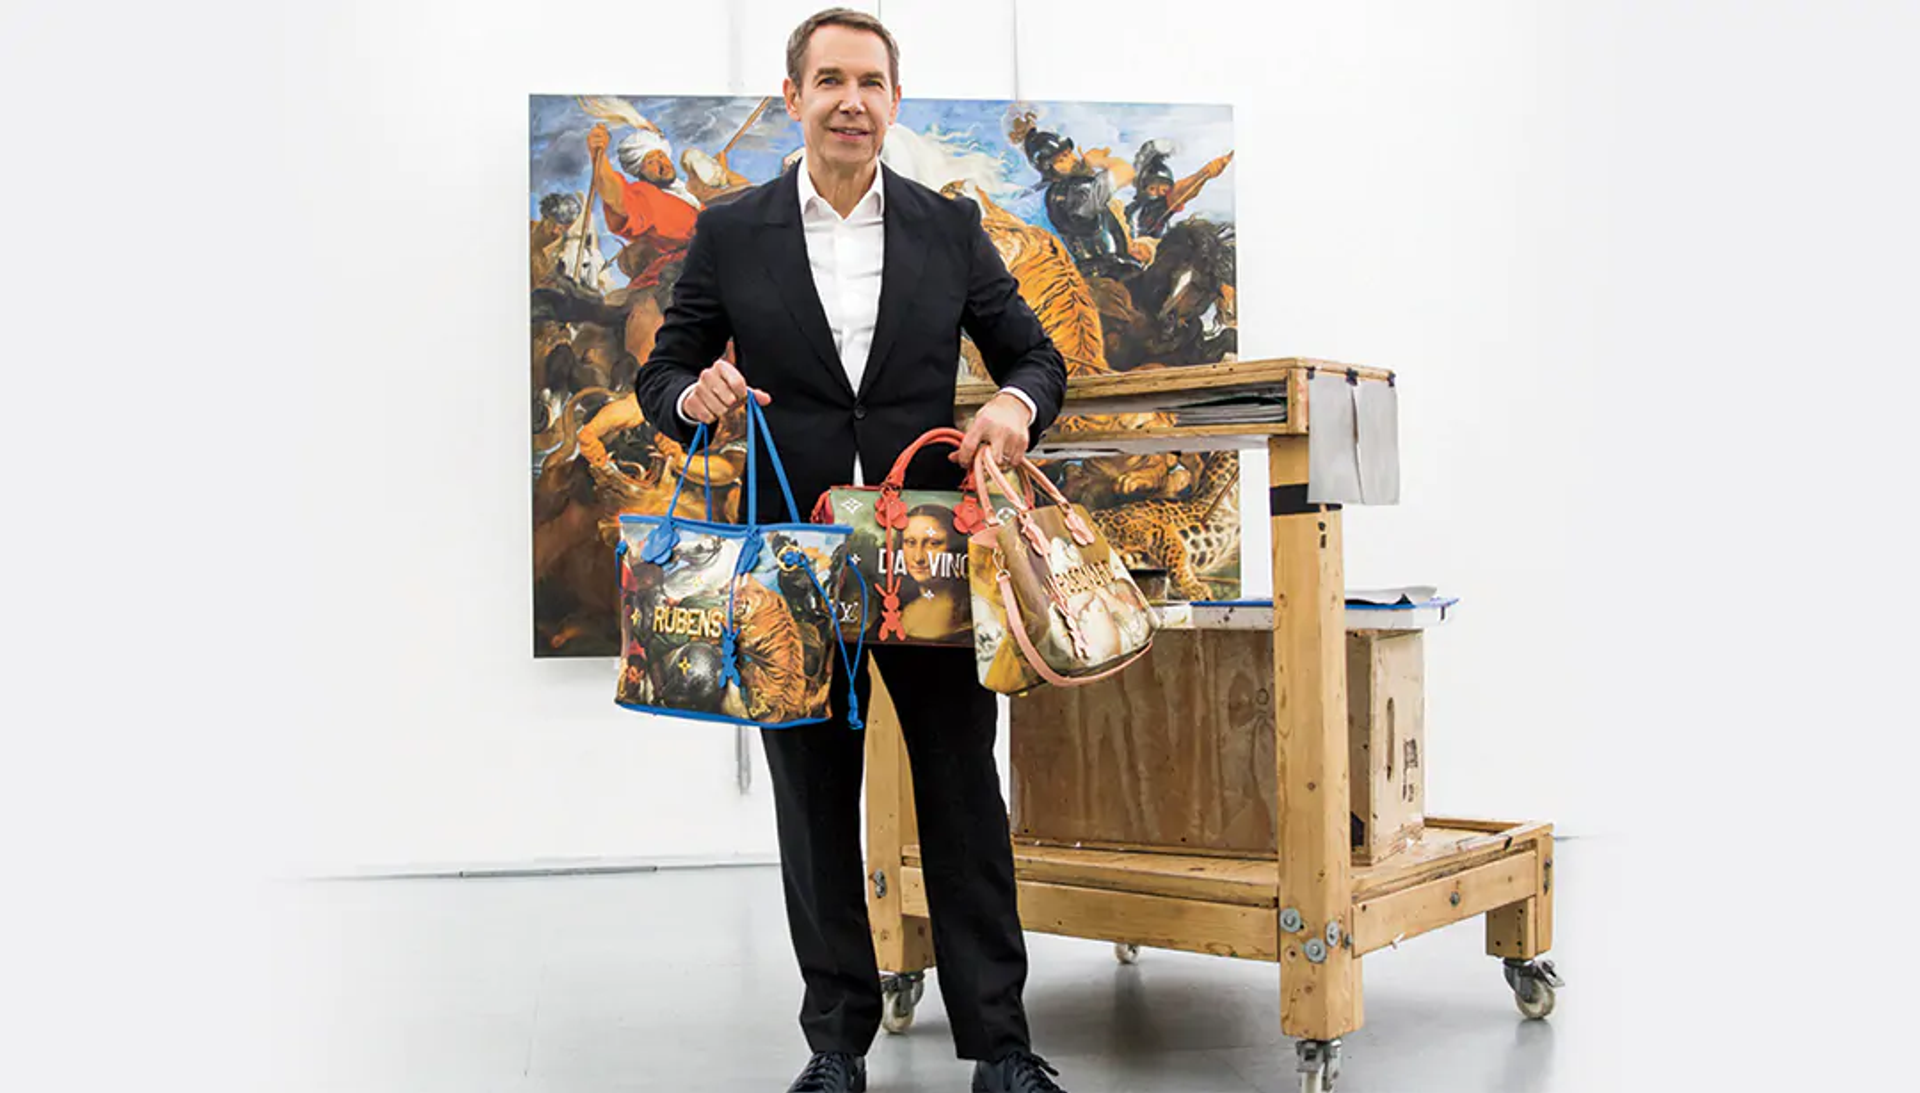 Image of Jeff Koons stood in front of a Renaissance painting, holding three bags from his Masters collection with Louis Vuitton